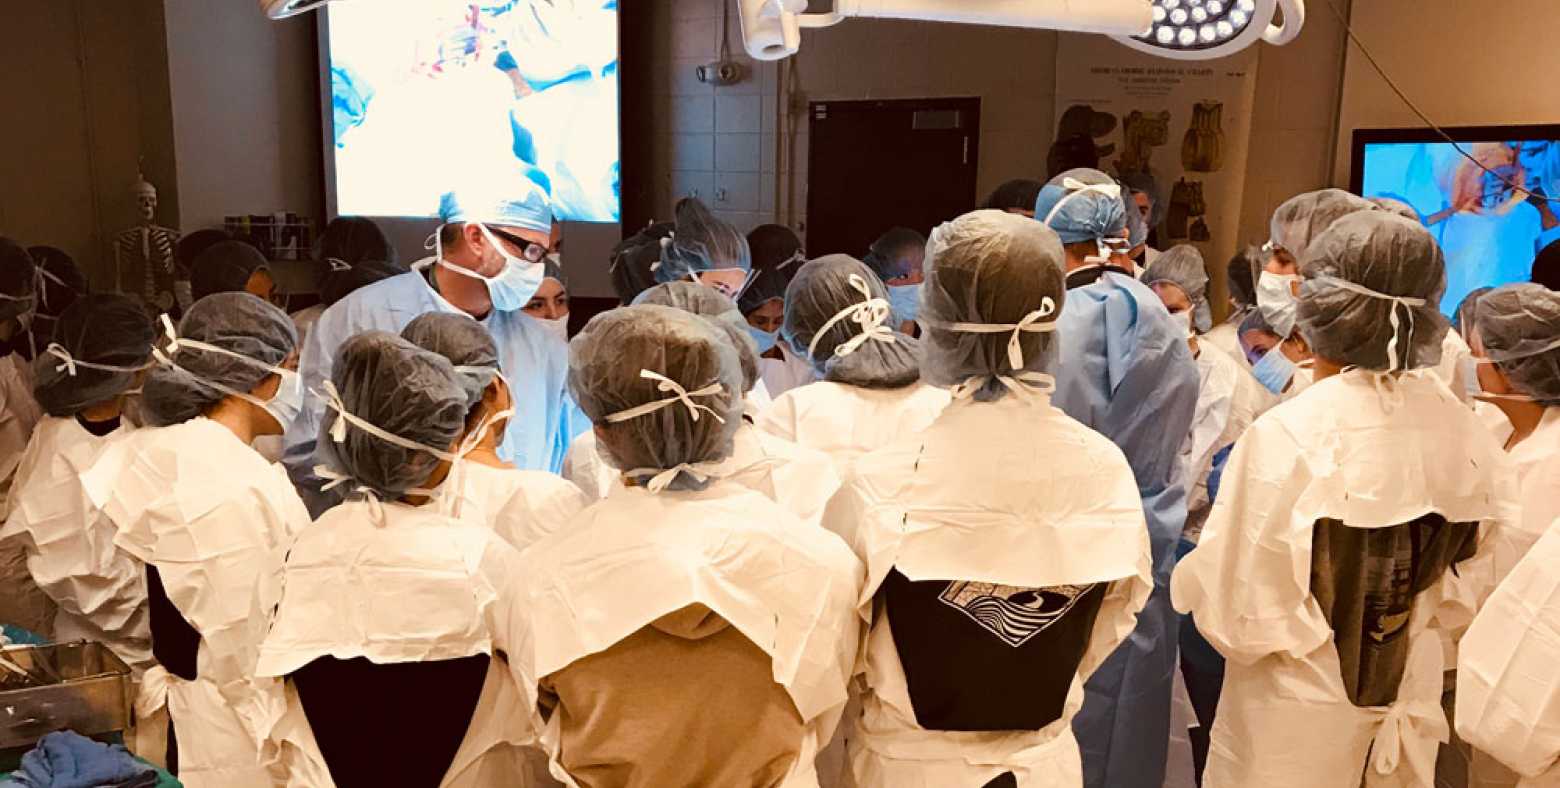 Students view surgery at UNR